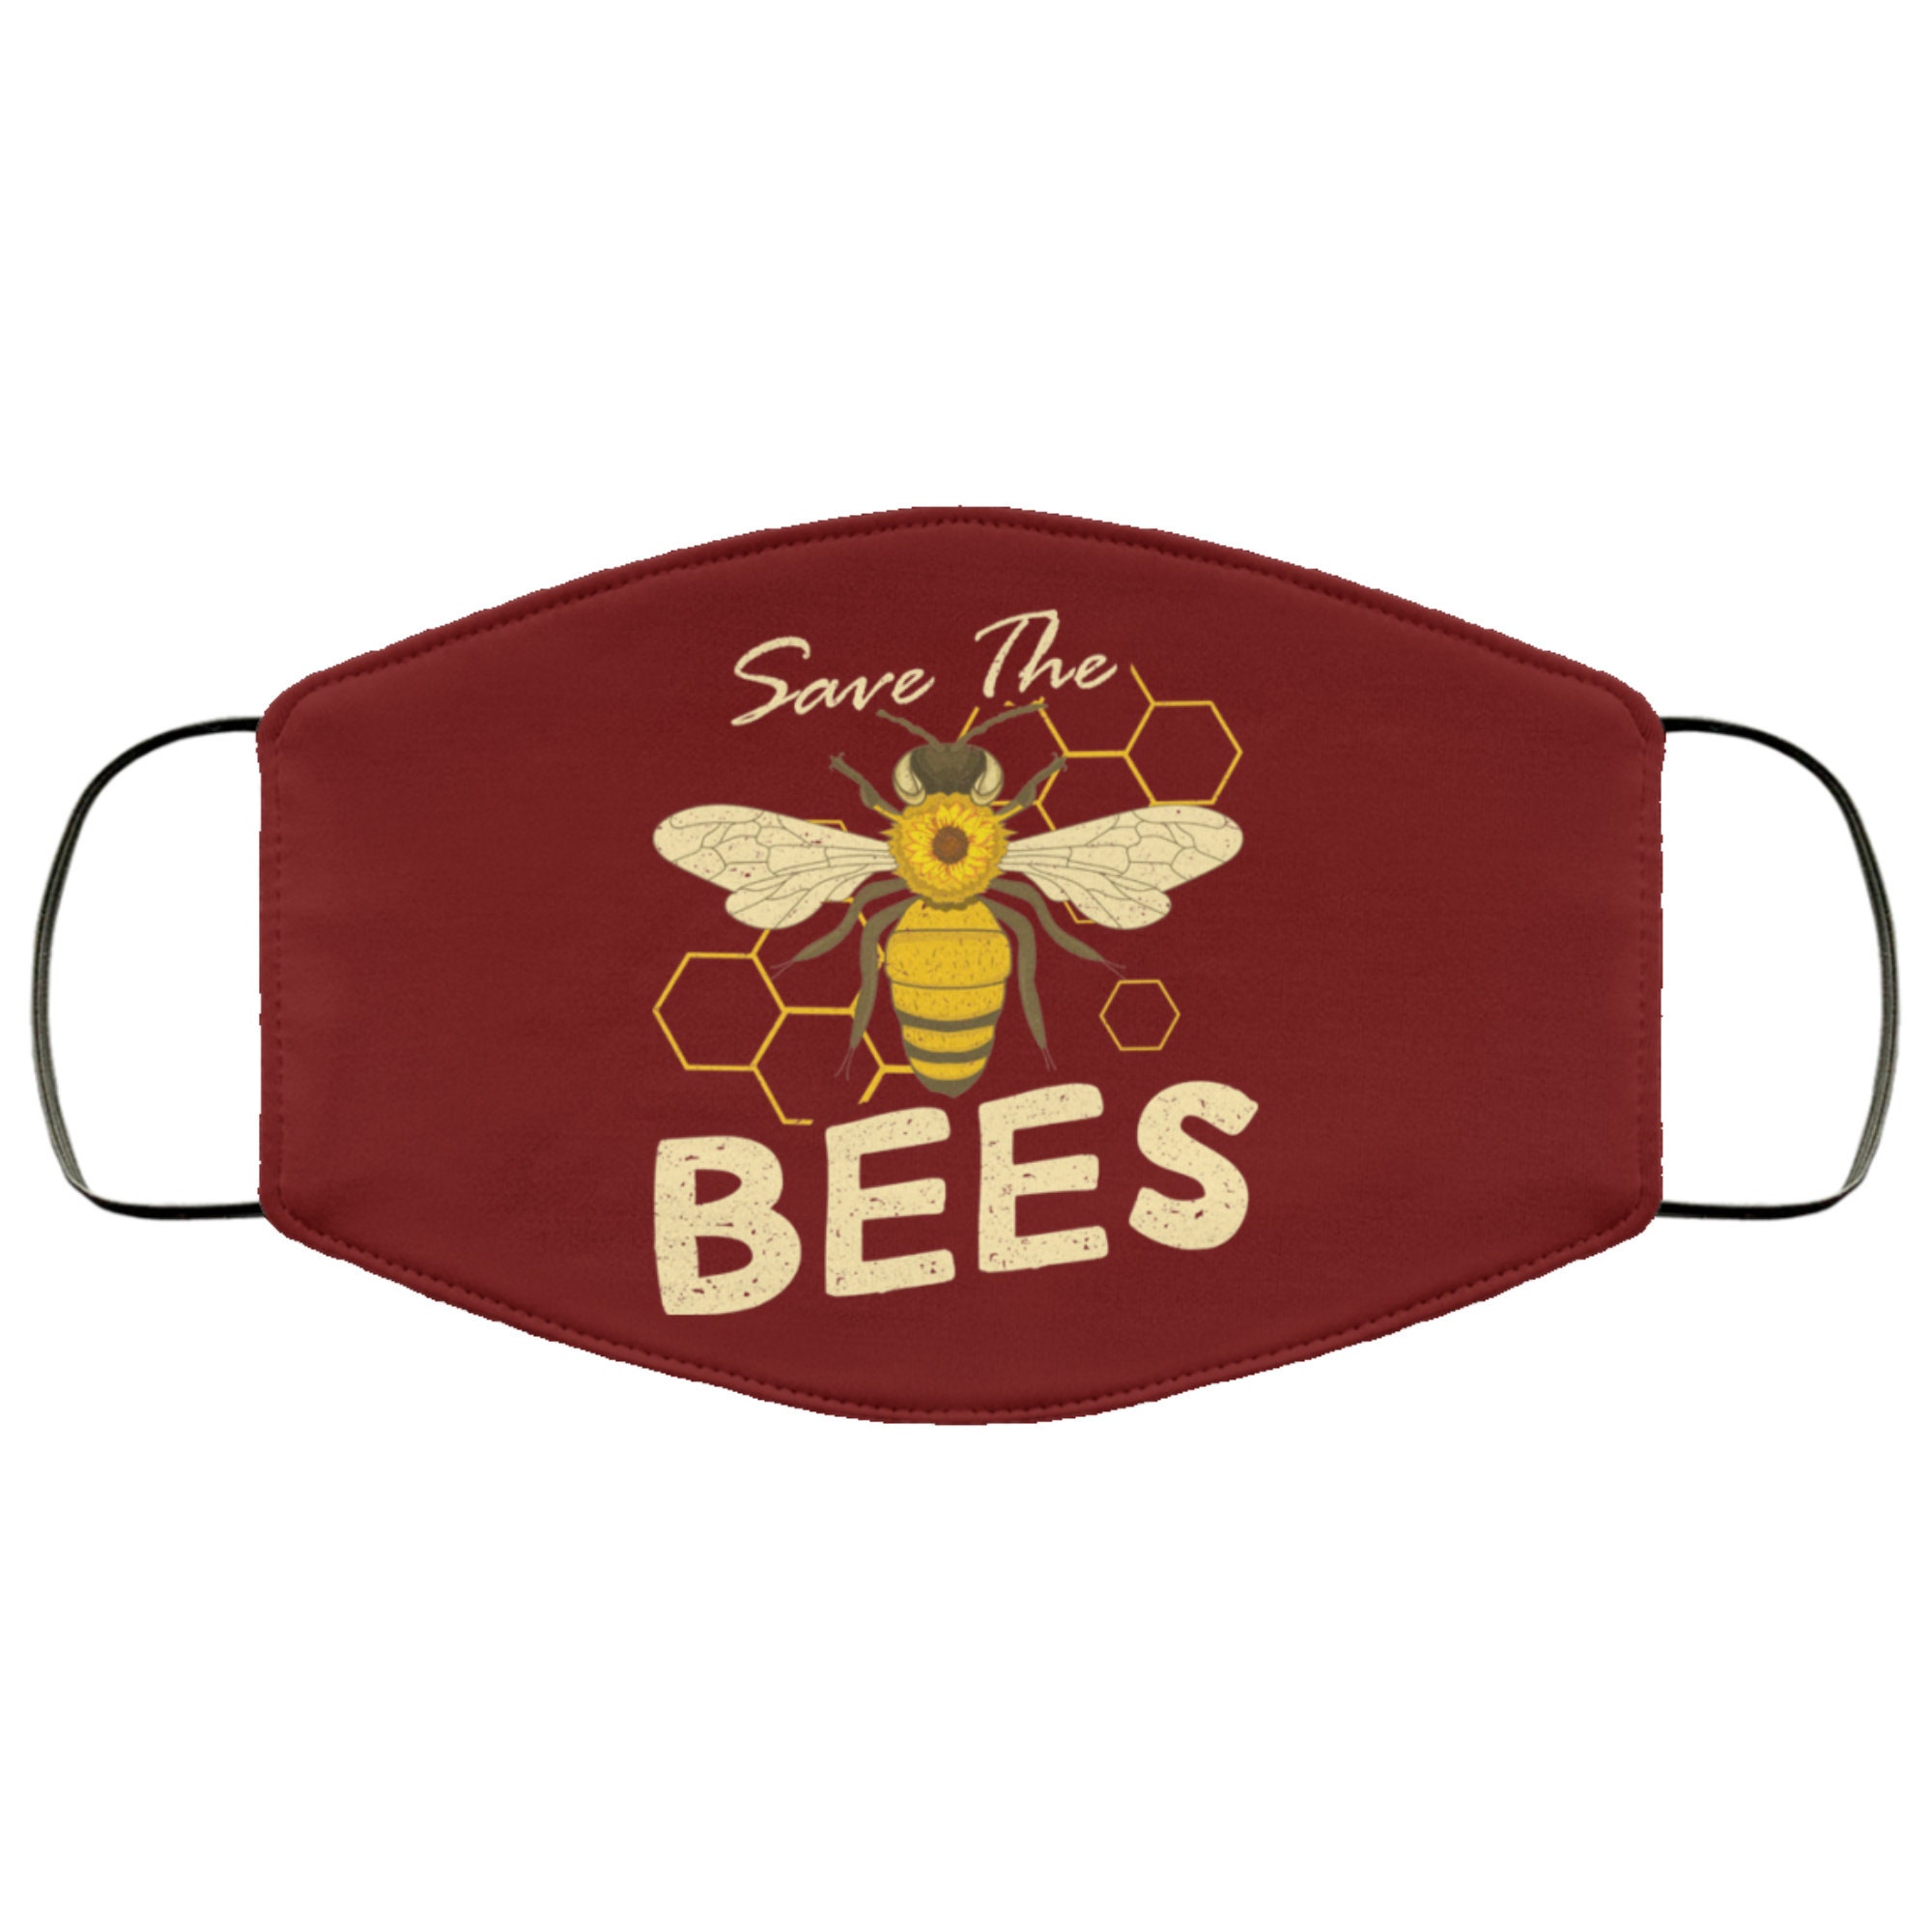 Save the Bees Face Mask Adult and Kids Mask Honey Queen pic